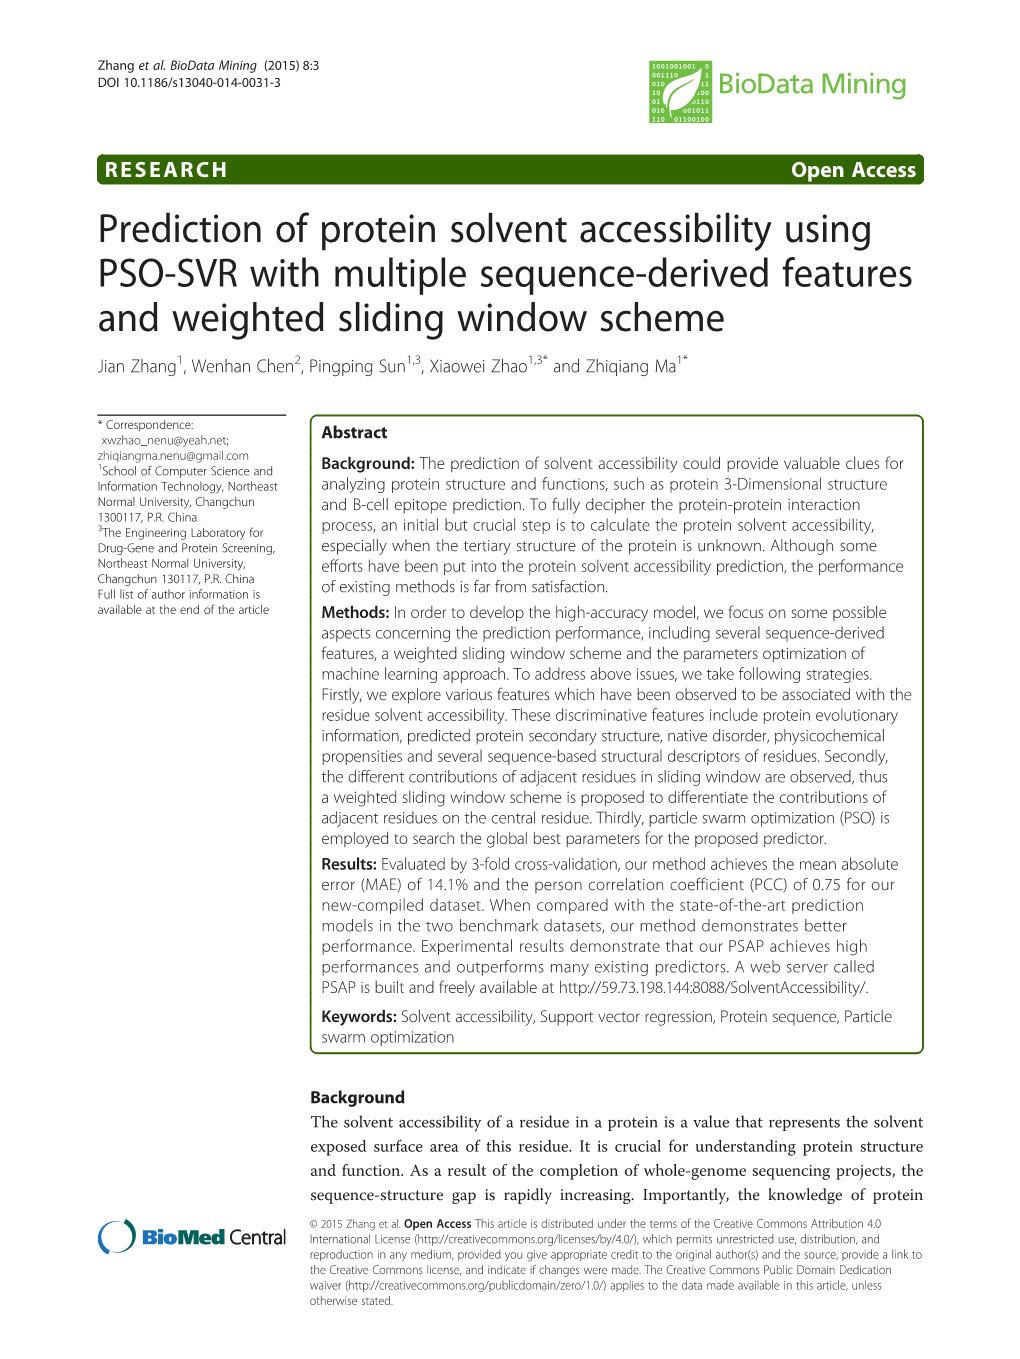 Prediction of Protein Solvent Accessibility Using PSO-SVR With